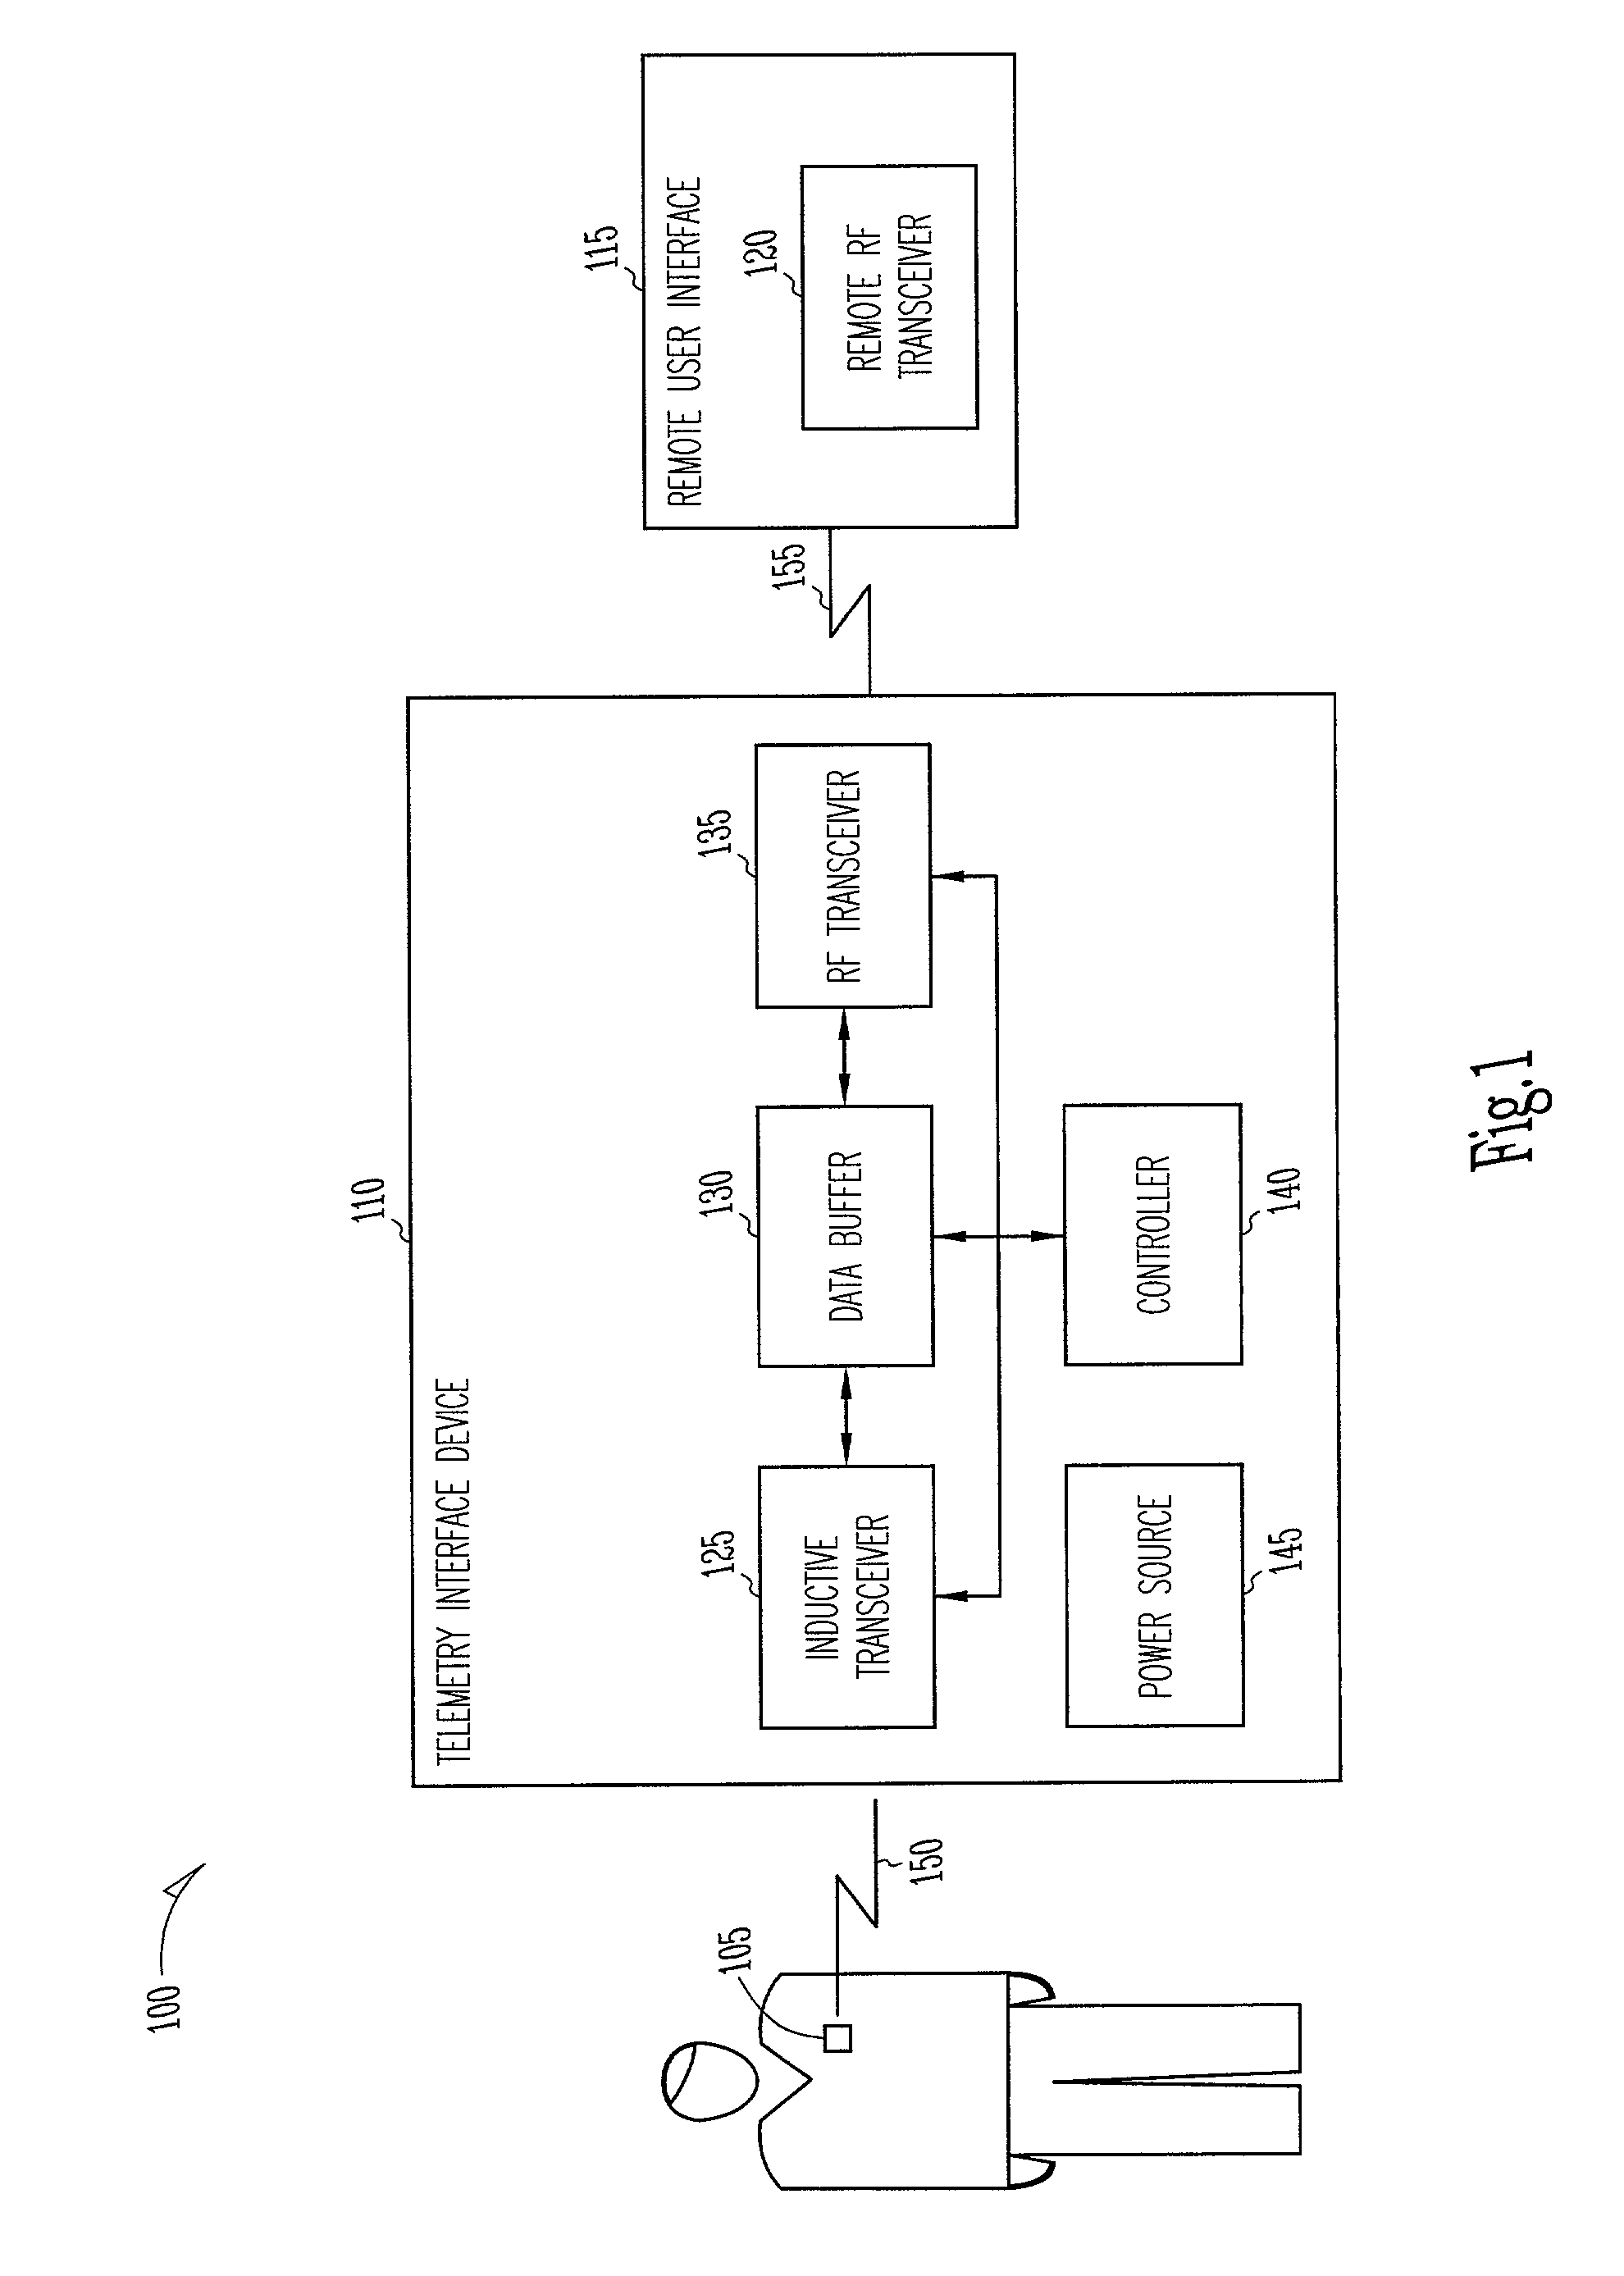 Two-hop telemetry interface for medical device